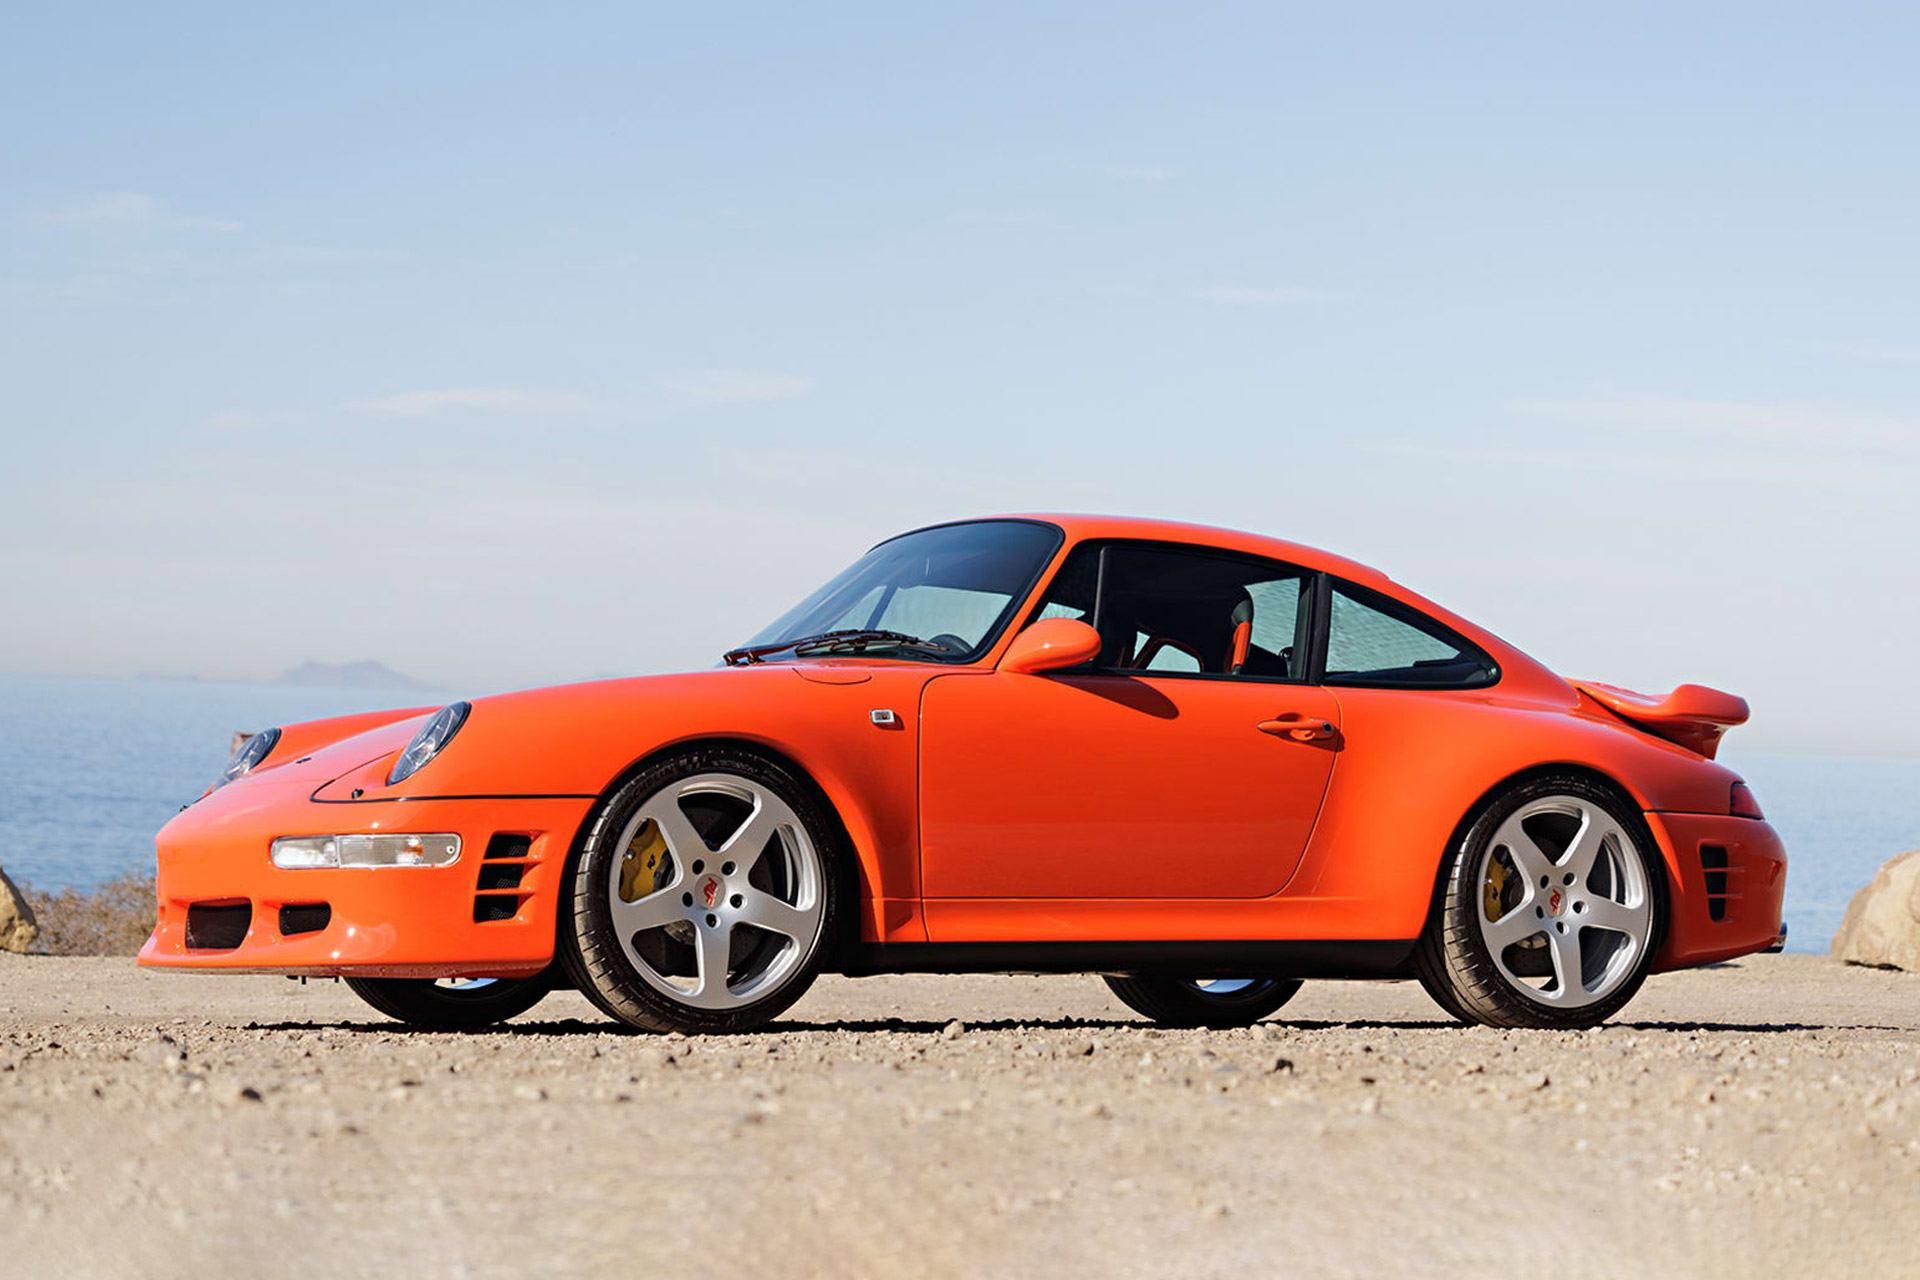 RUF Car Collection | Uncrate, #RUF #Car #Collection #Uncrate